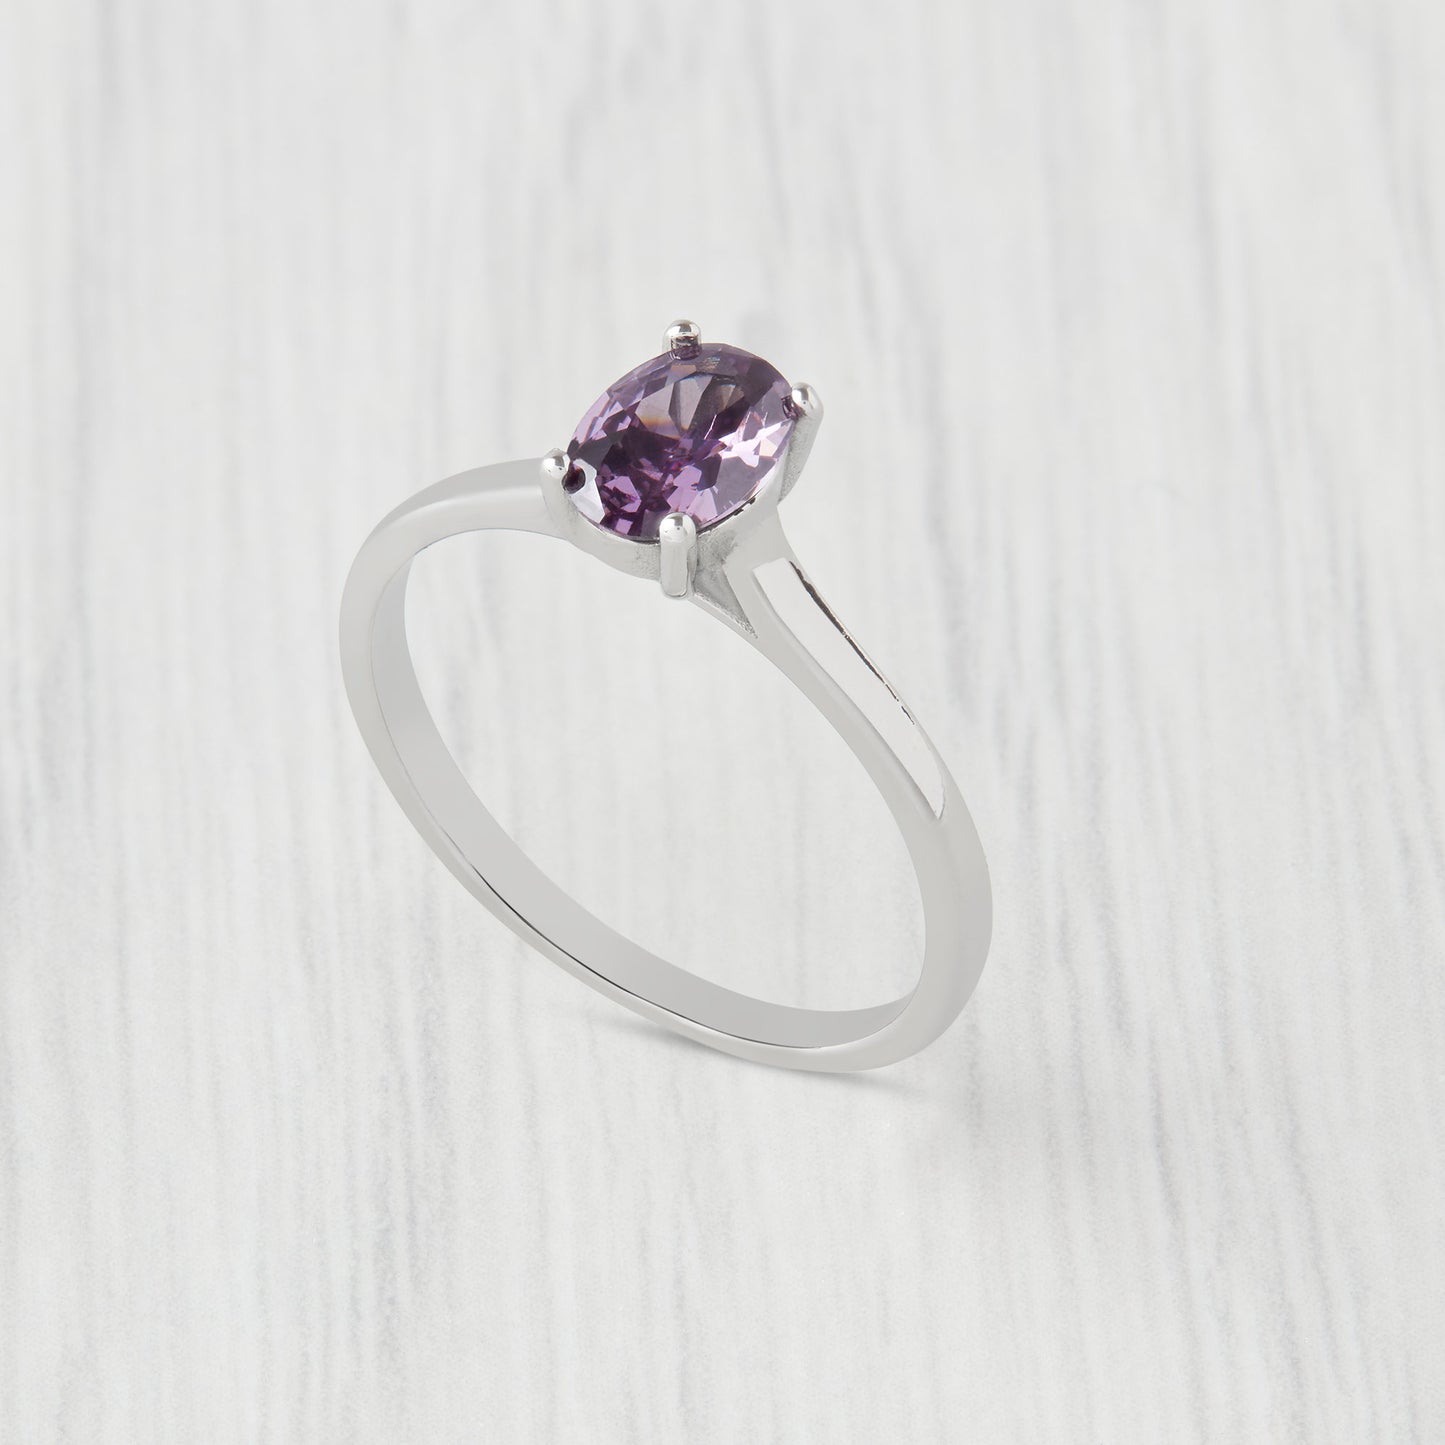 0.7ct Oval Cut Amethyst Solitaire cathedral ring in Titanium or White Gold